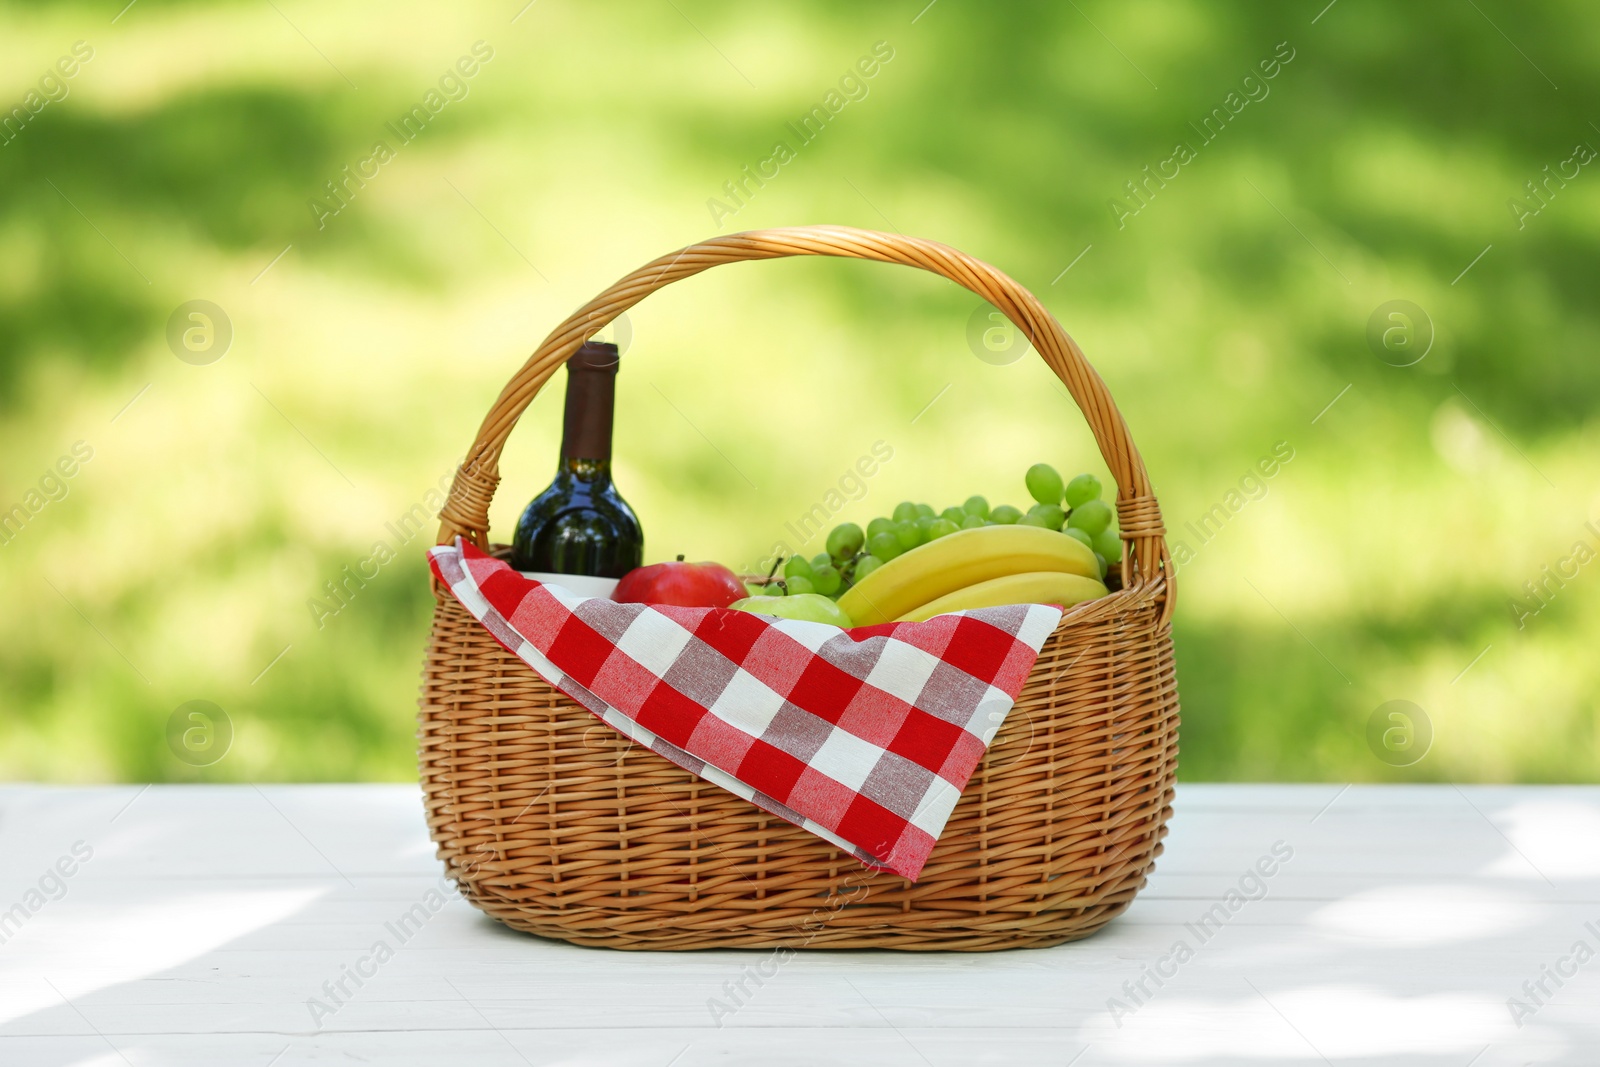 Photo of Wicker basket with blanket, wine and food on table in park. Summer picnic